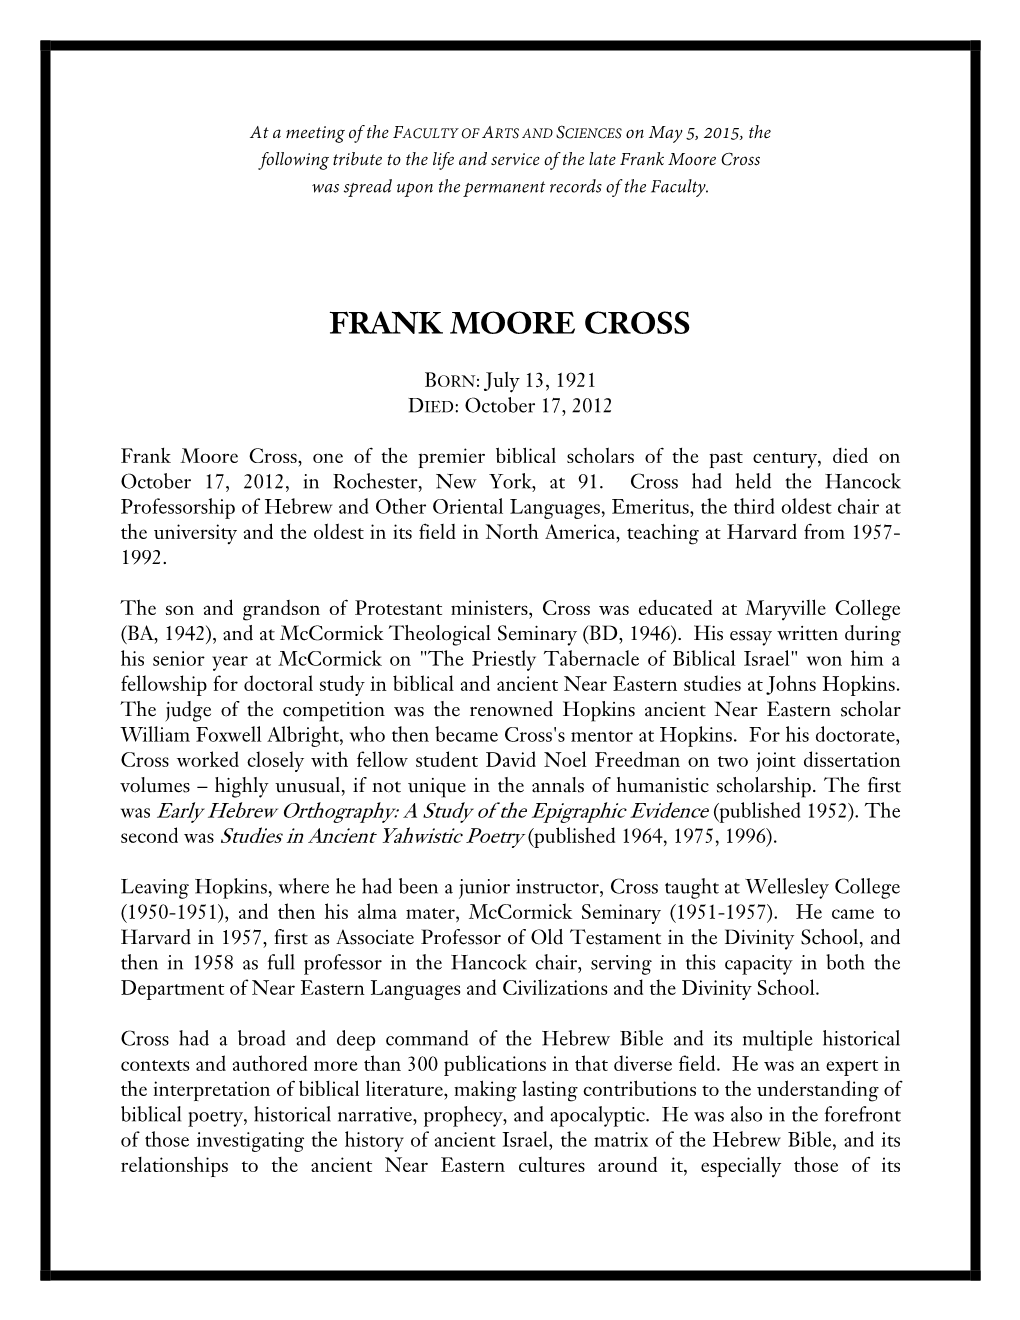 Frank Moore Cross Was Spread Upon the Permanent Records of the Faculty